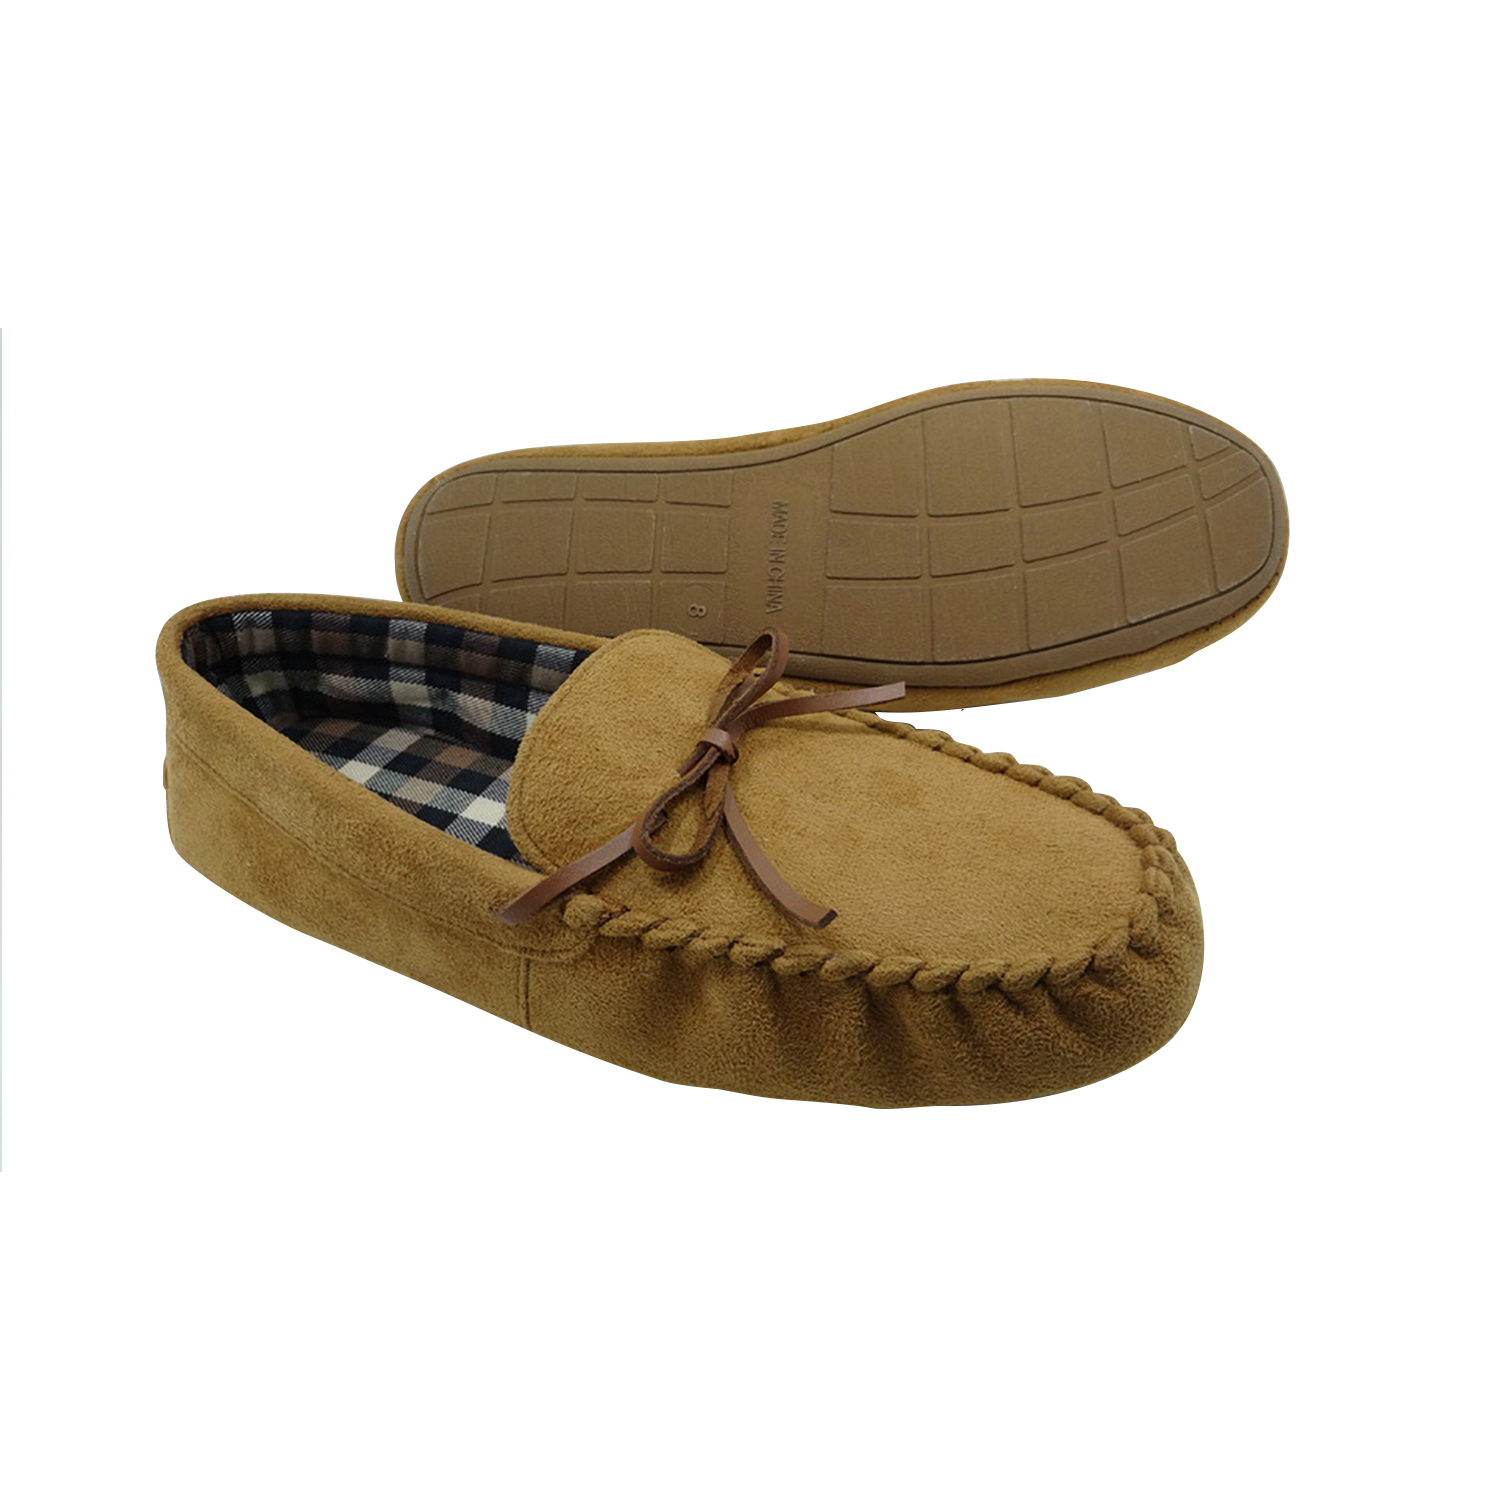 Mens Slippers Microsuede Moccasin Memory Foam House Shoes 